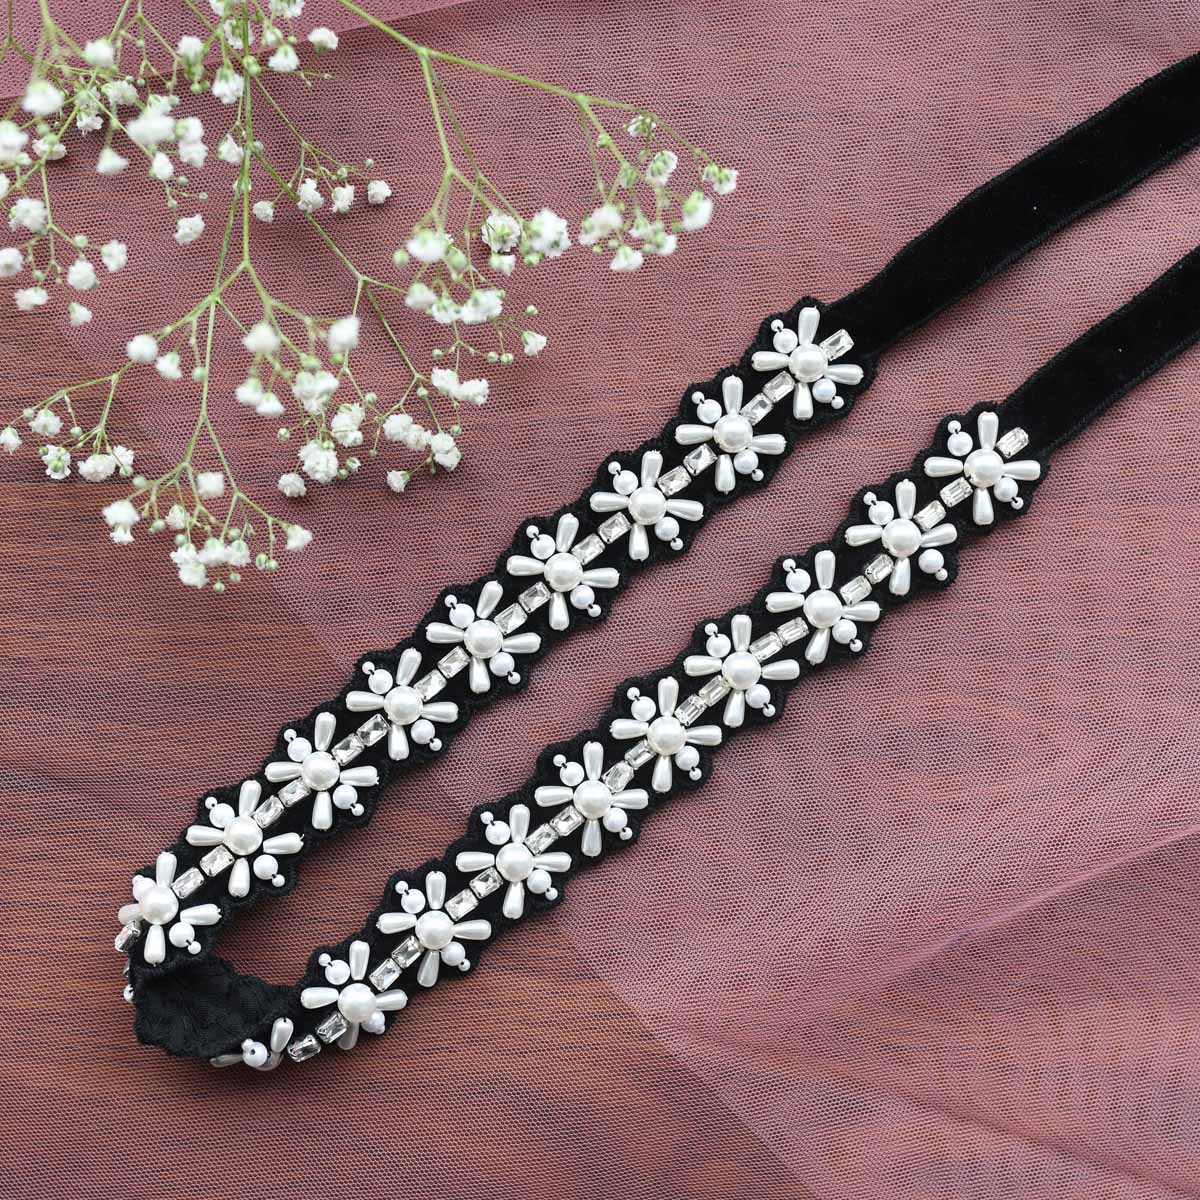 Embroidered Tie up Headband with Pearl Flowers